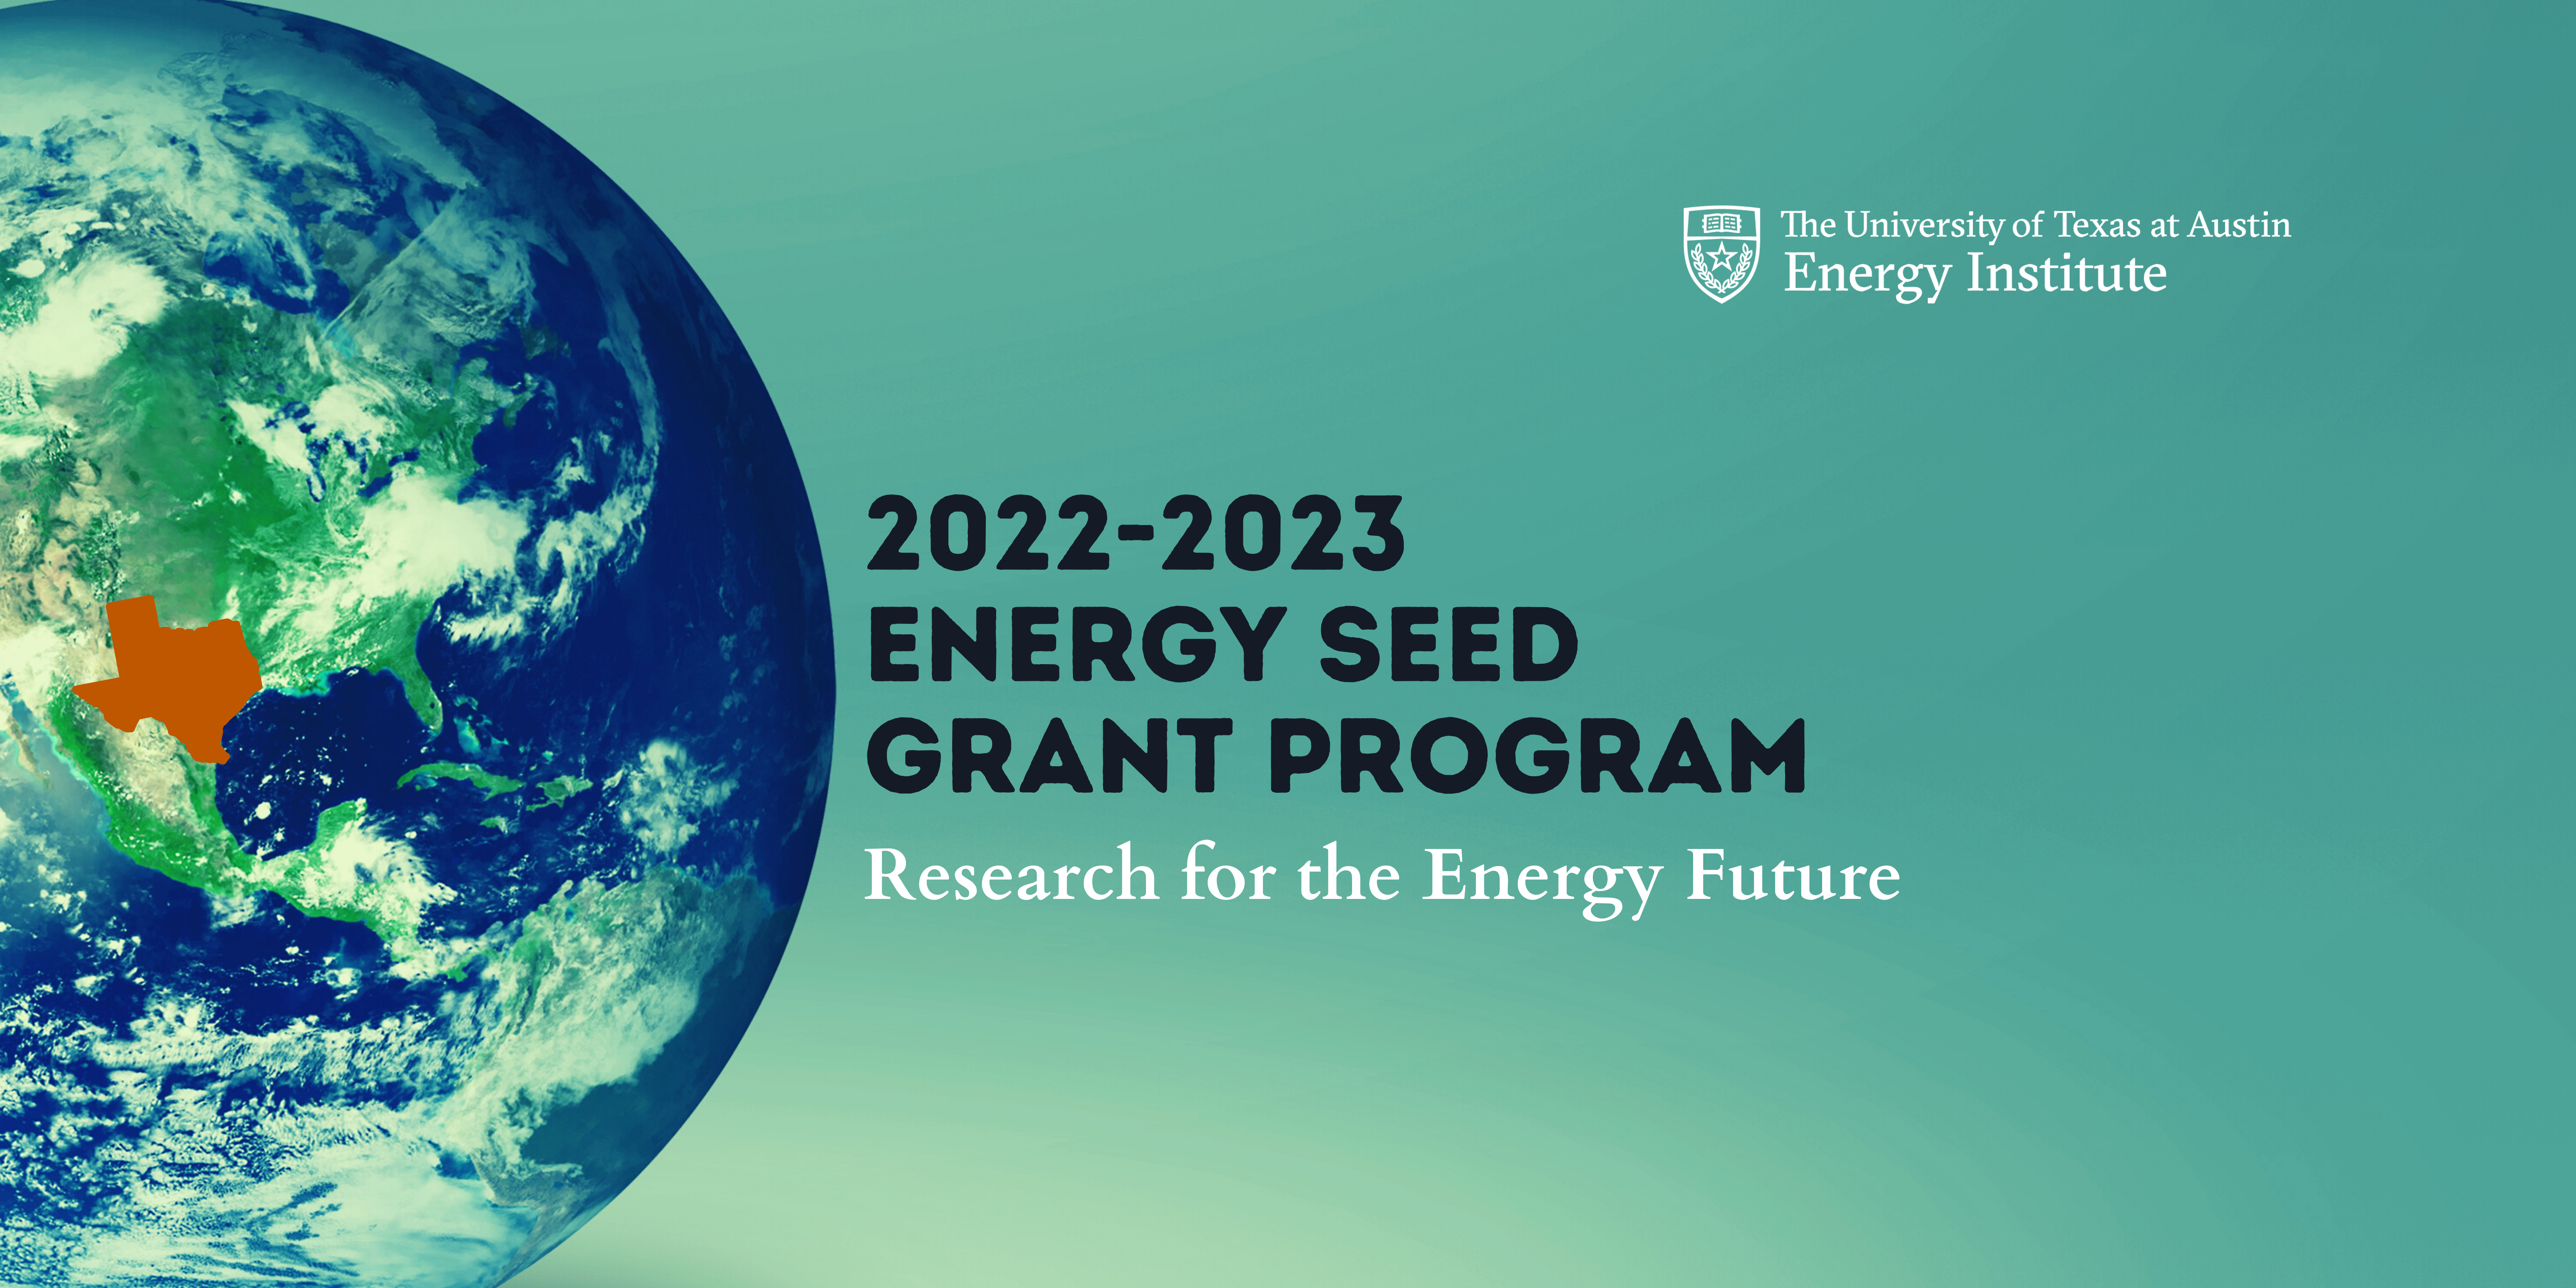 2022-2023 Energy Seed Grant Program Research for the Energy Future